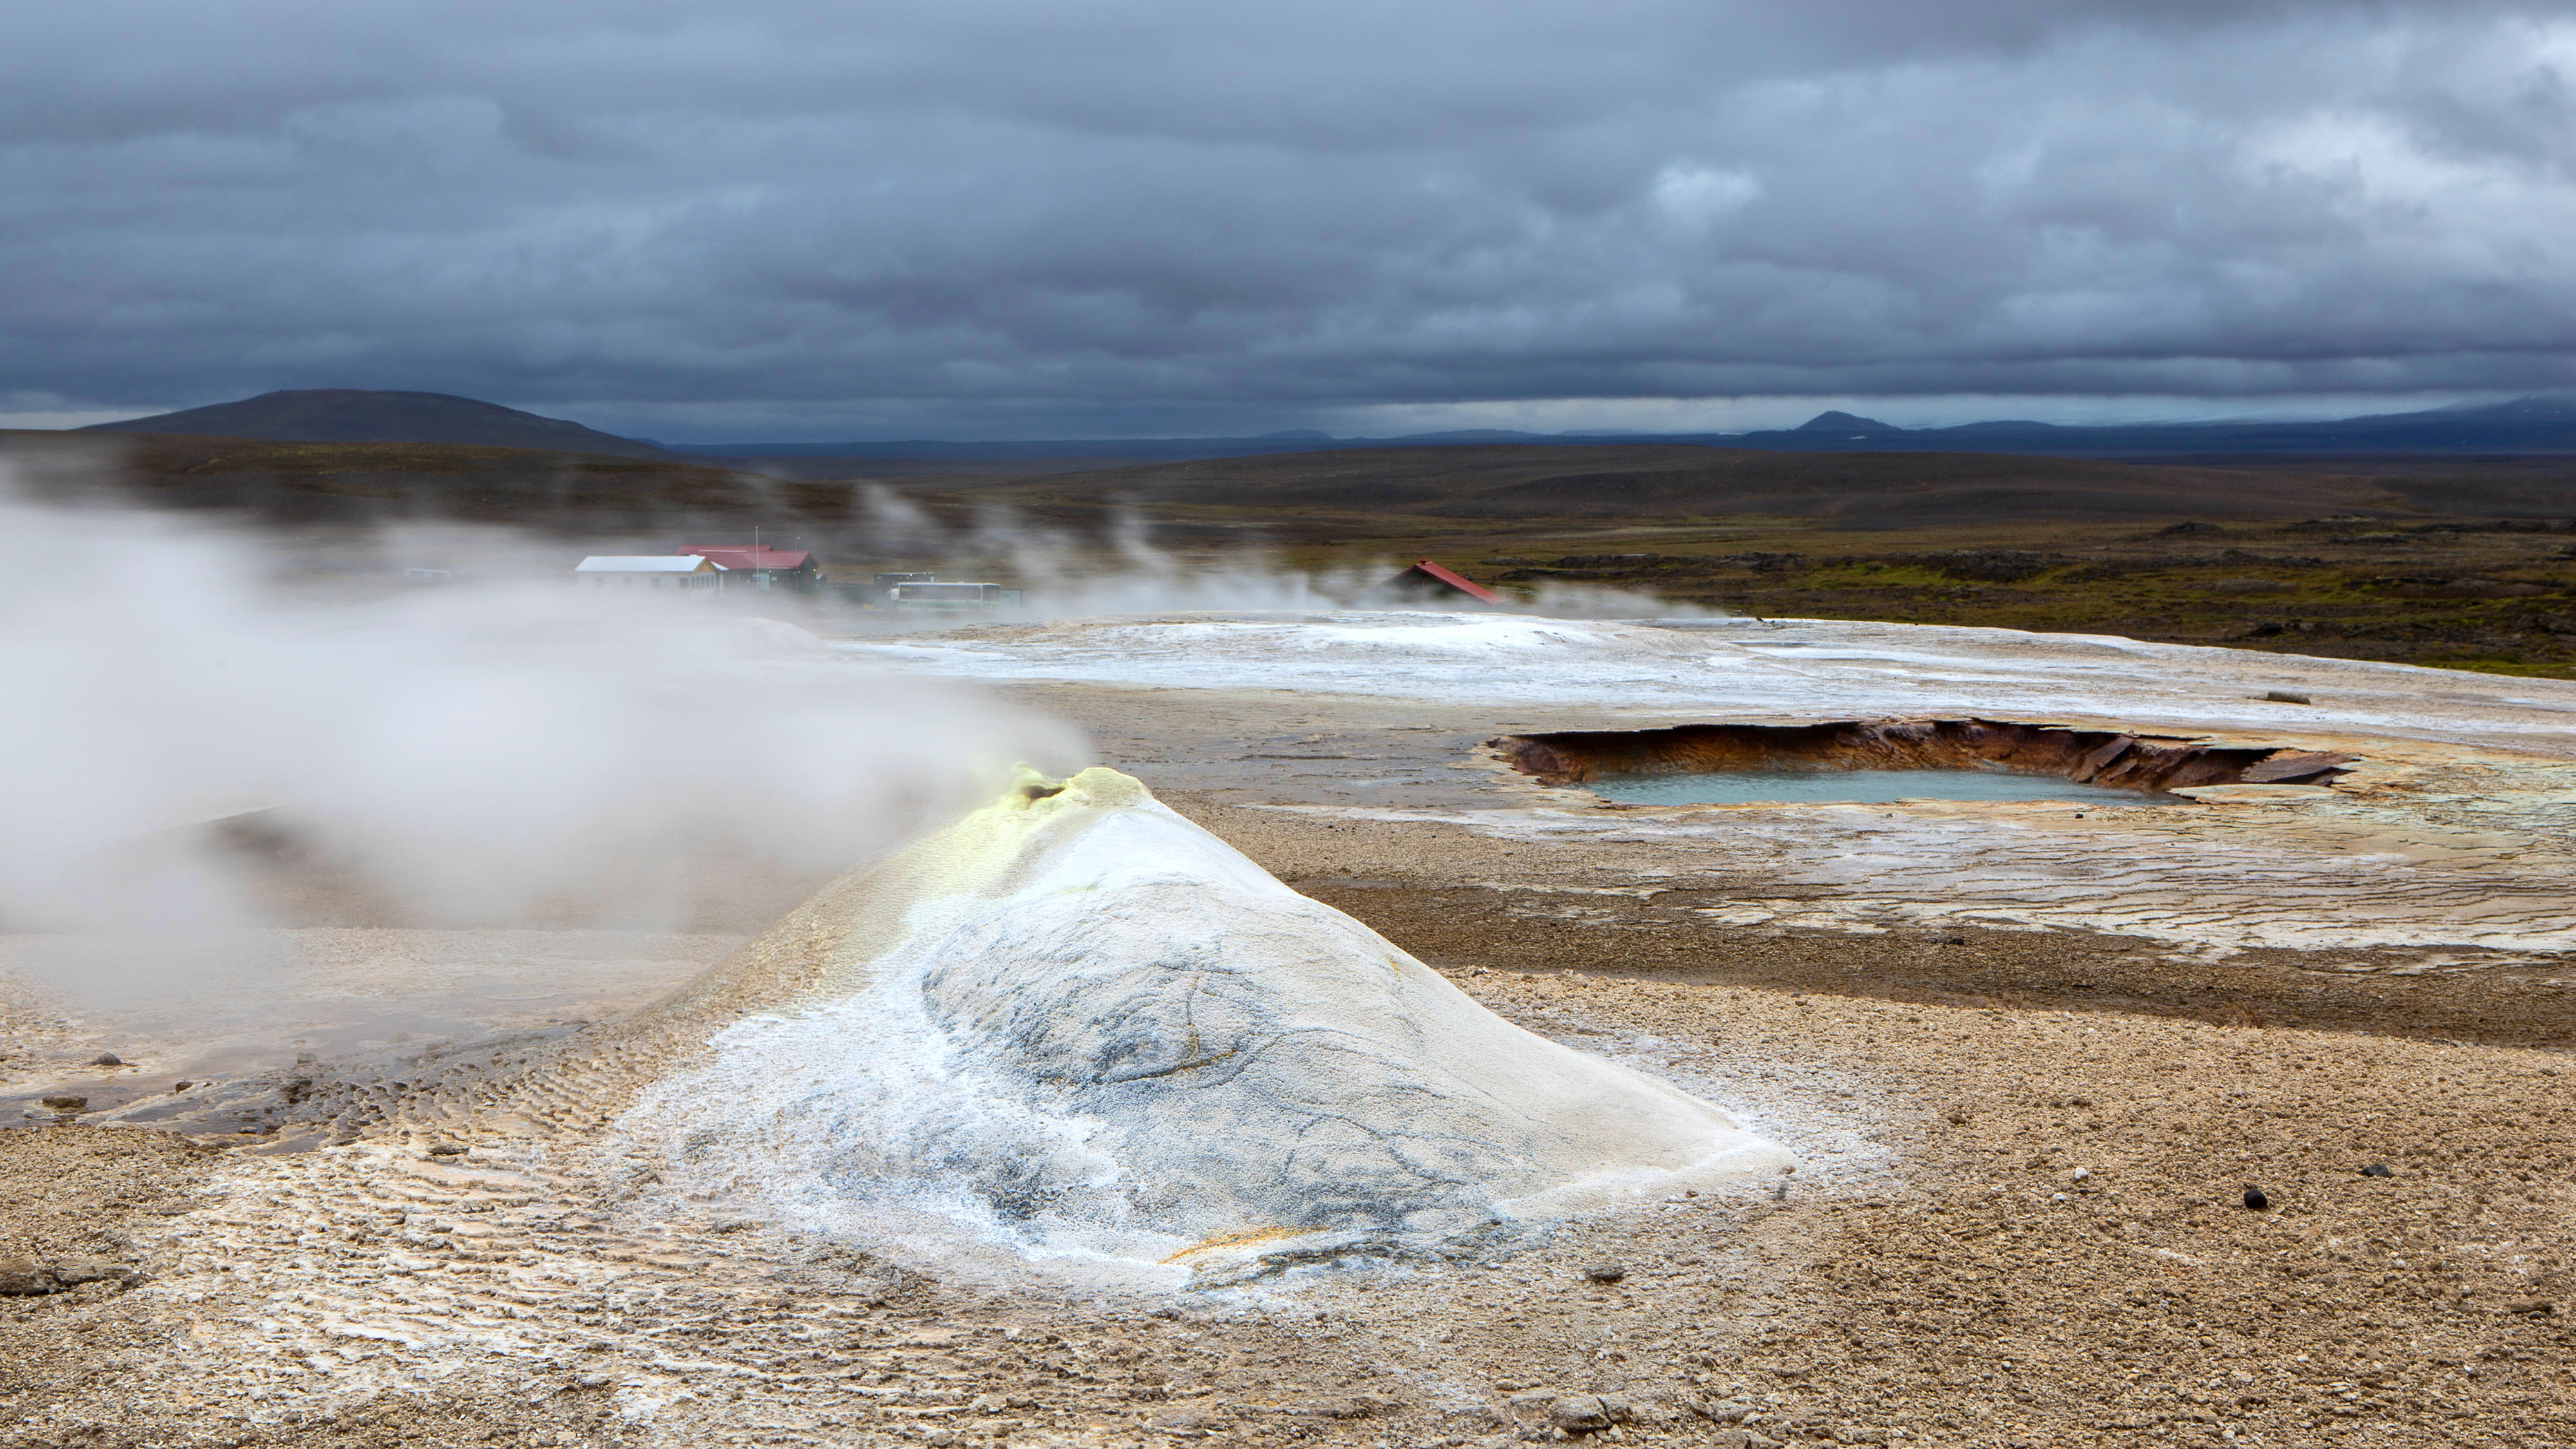 The geothermal energy hotspot